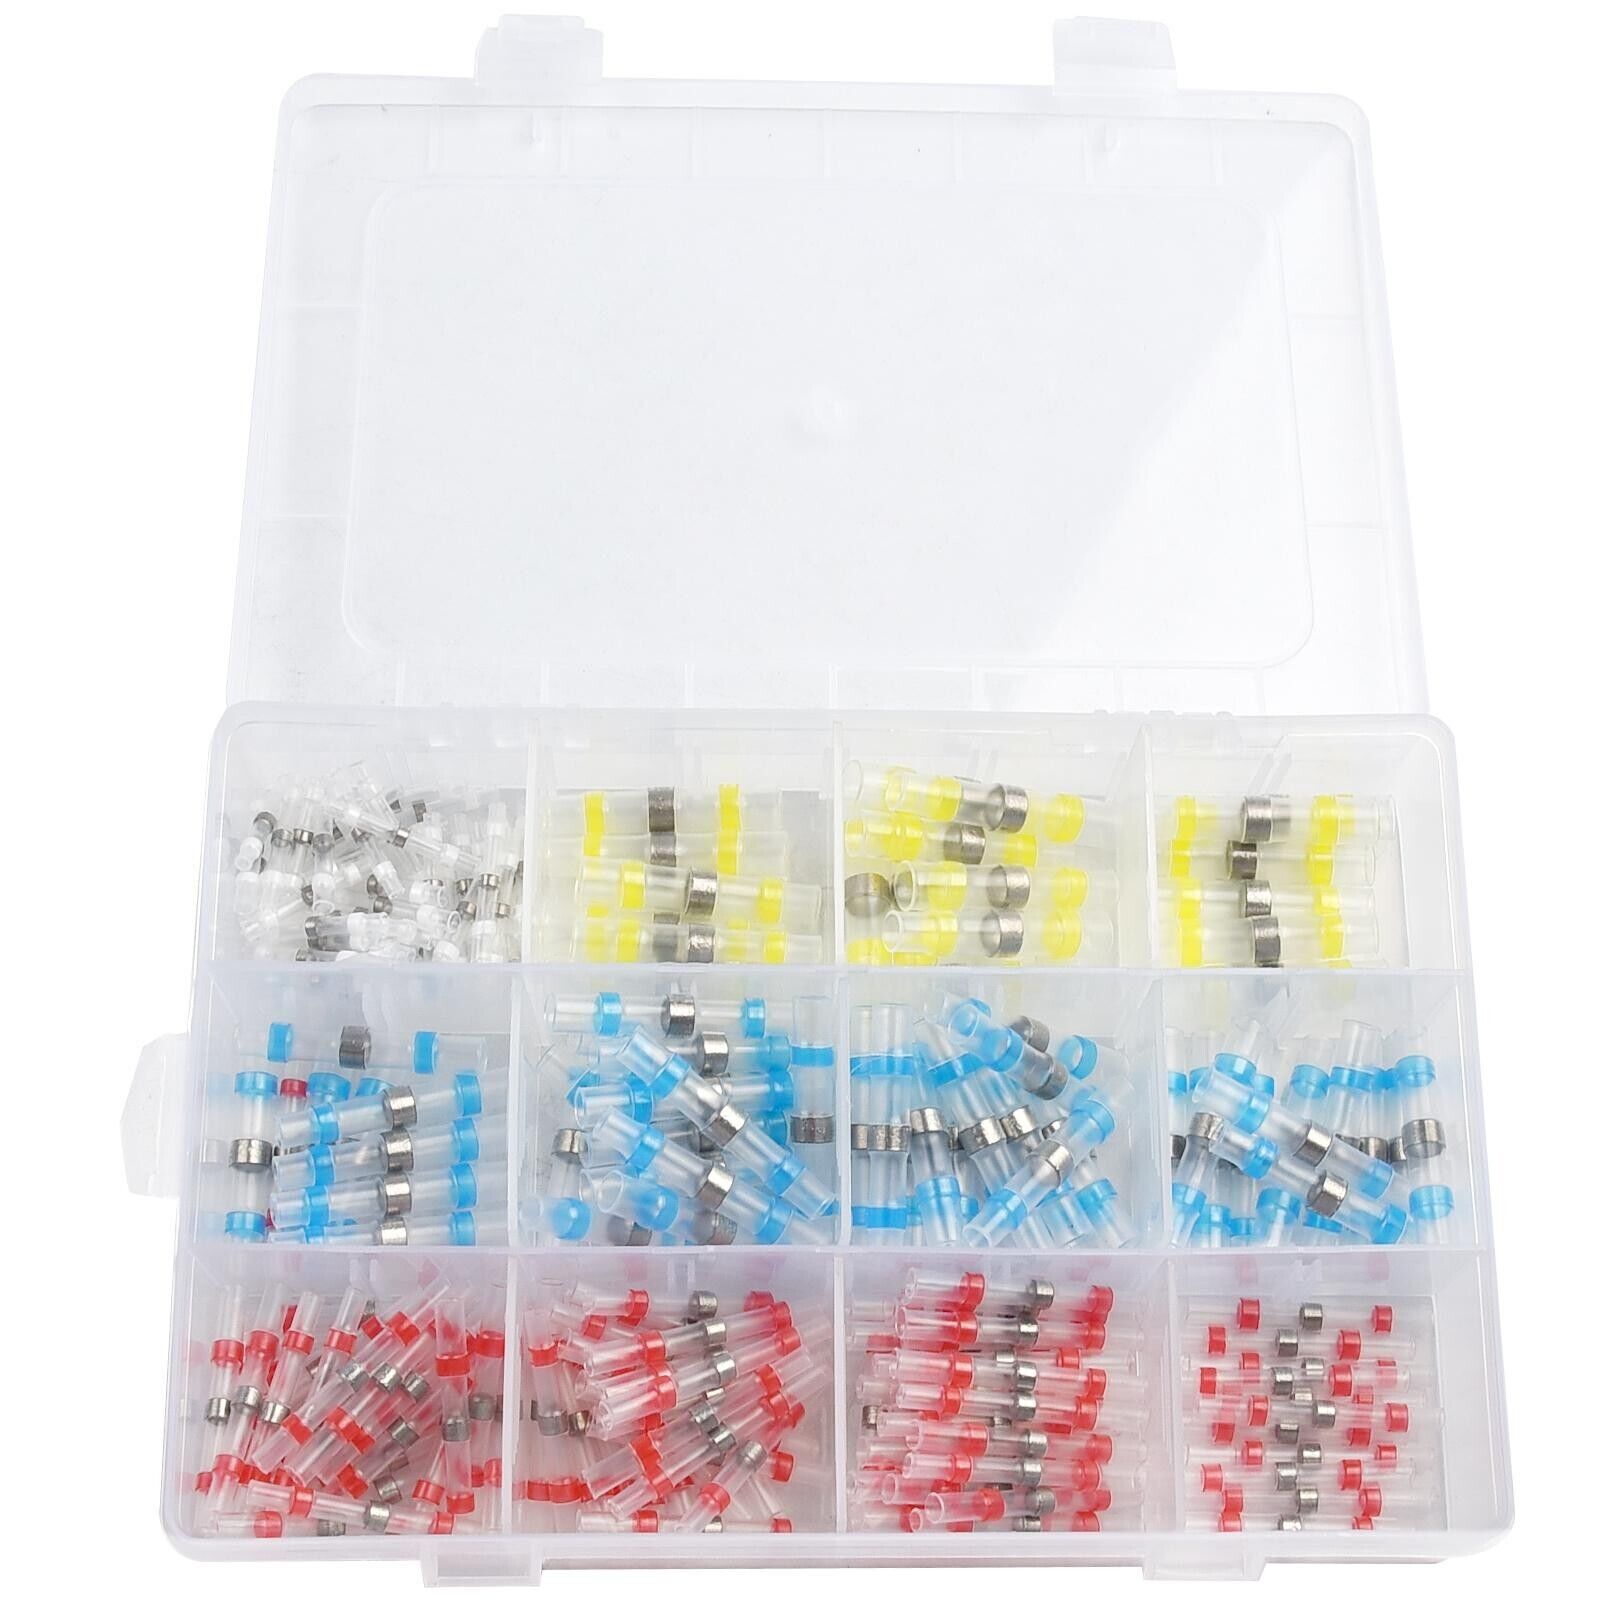 Solder Wire Connector Kit Waterproof Sleeve Wire Splice | 200 Piece Kit - South East Clearance Centre